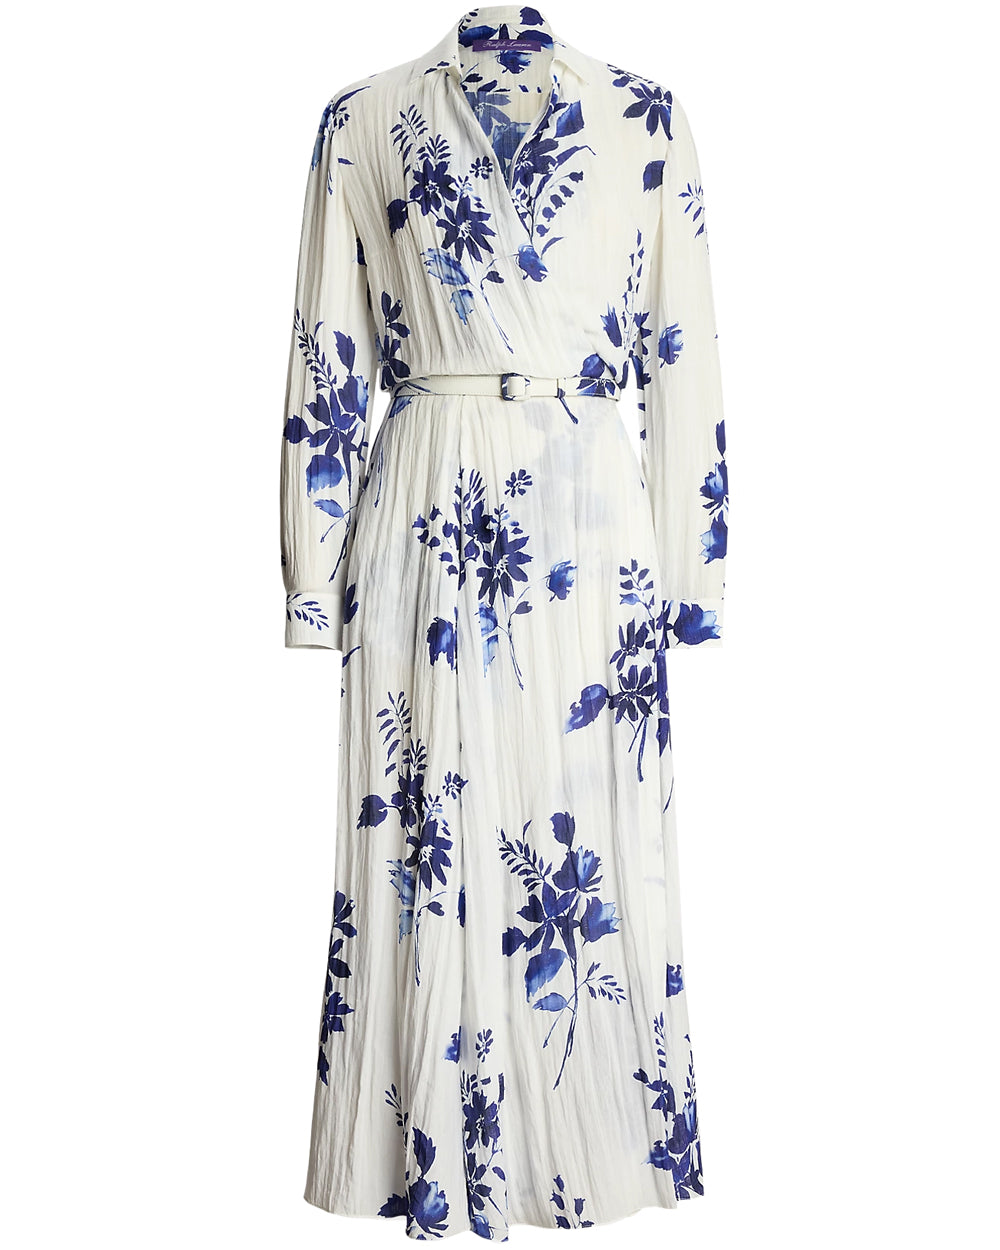 Sapphire and Cream Watercolor Long Sleeve Day Dress